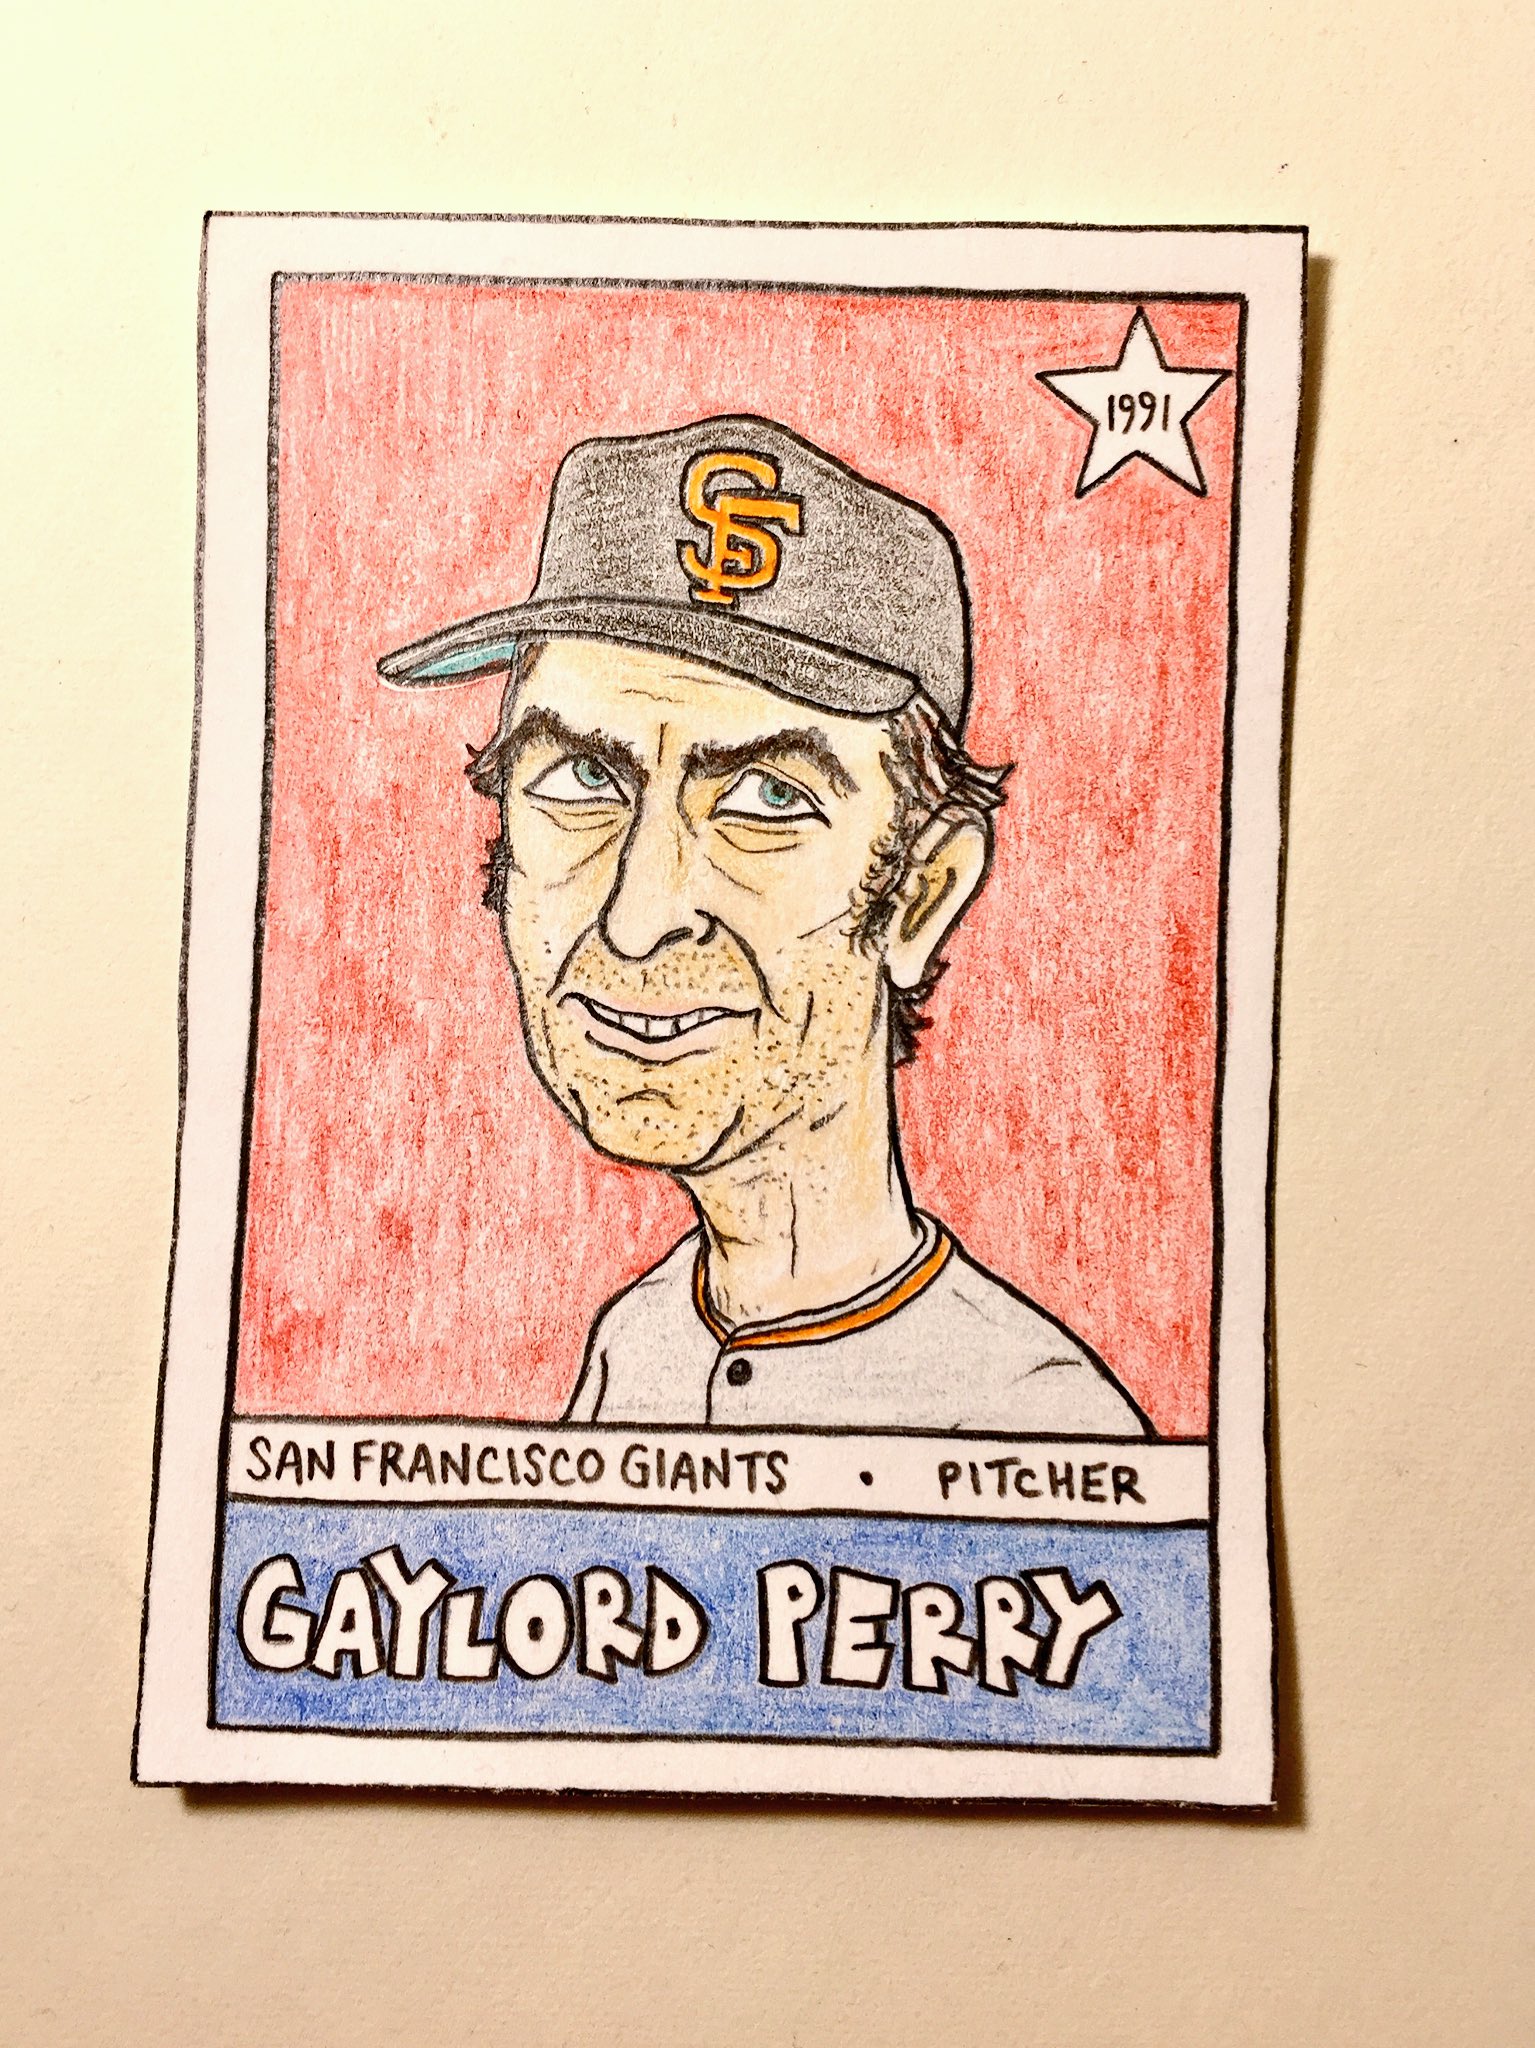 Wishing a very happy 80th birthday to Gaylord Perry!     